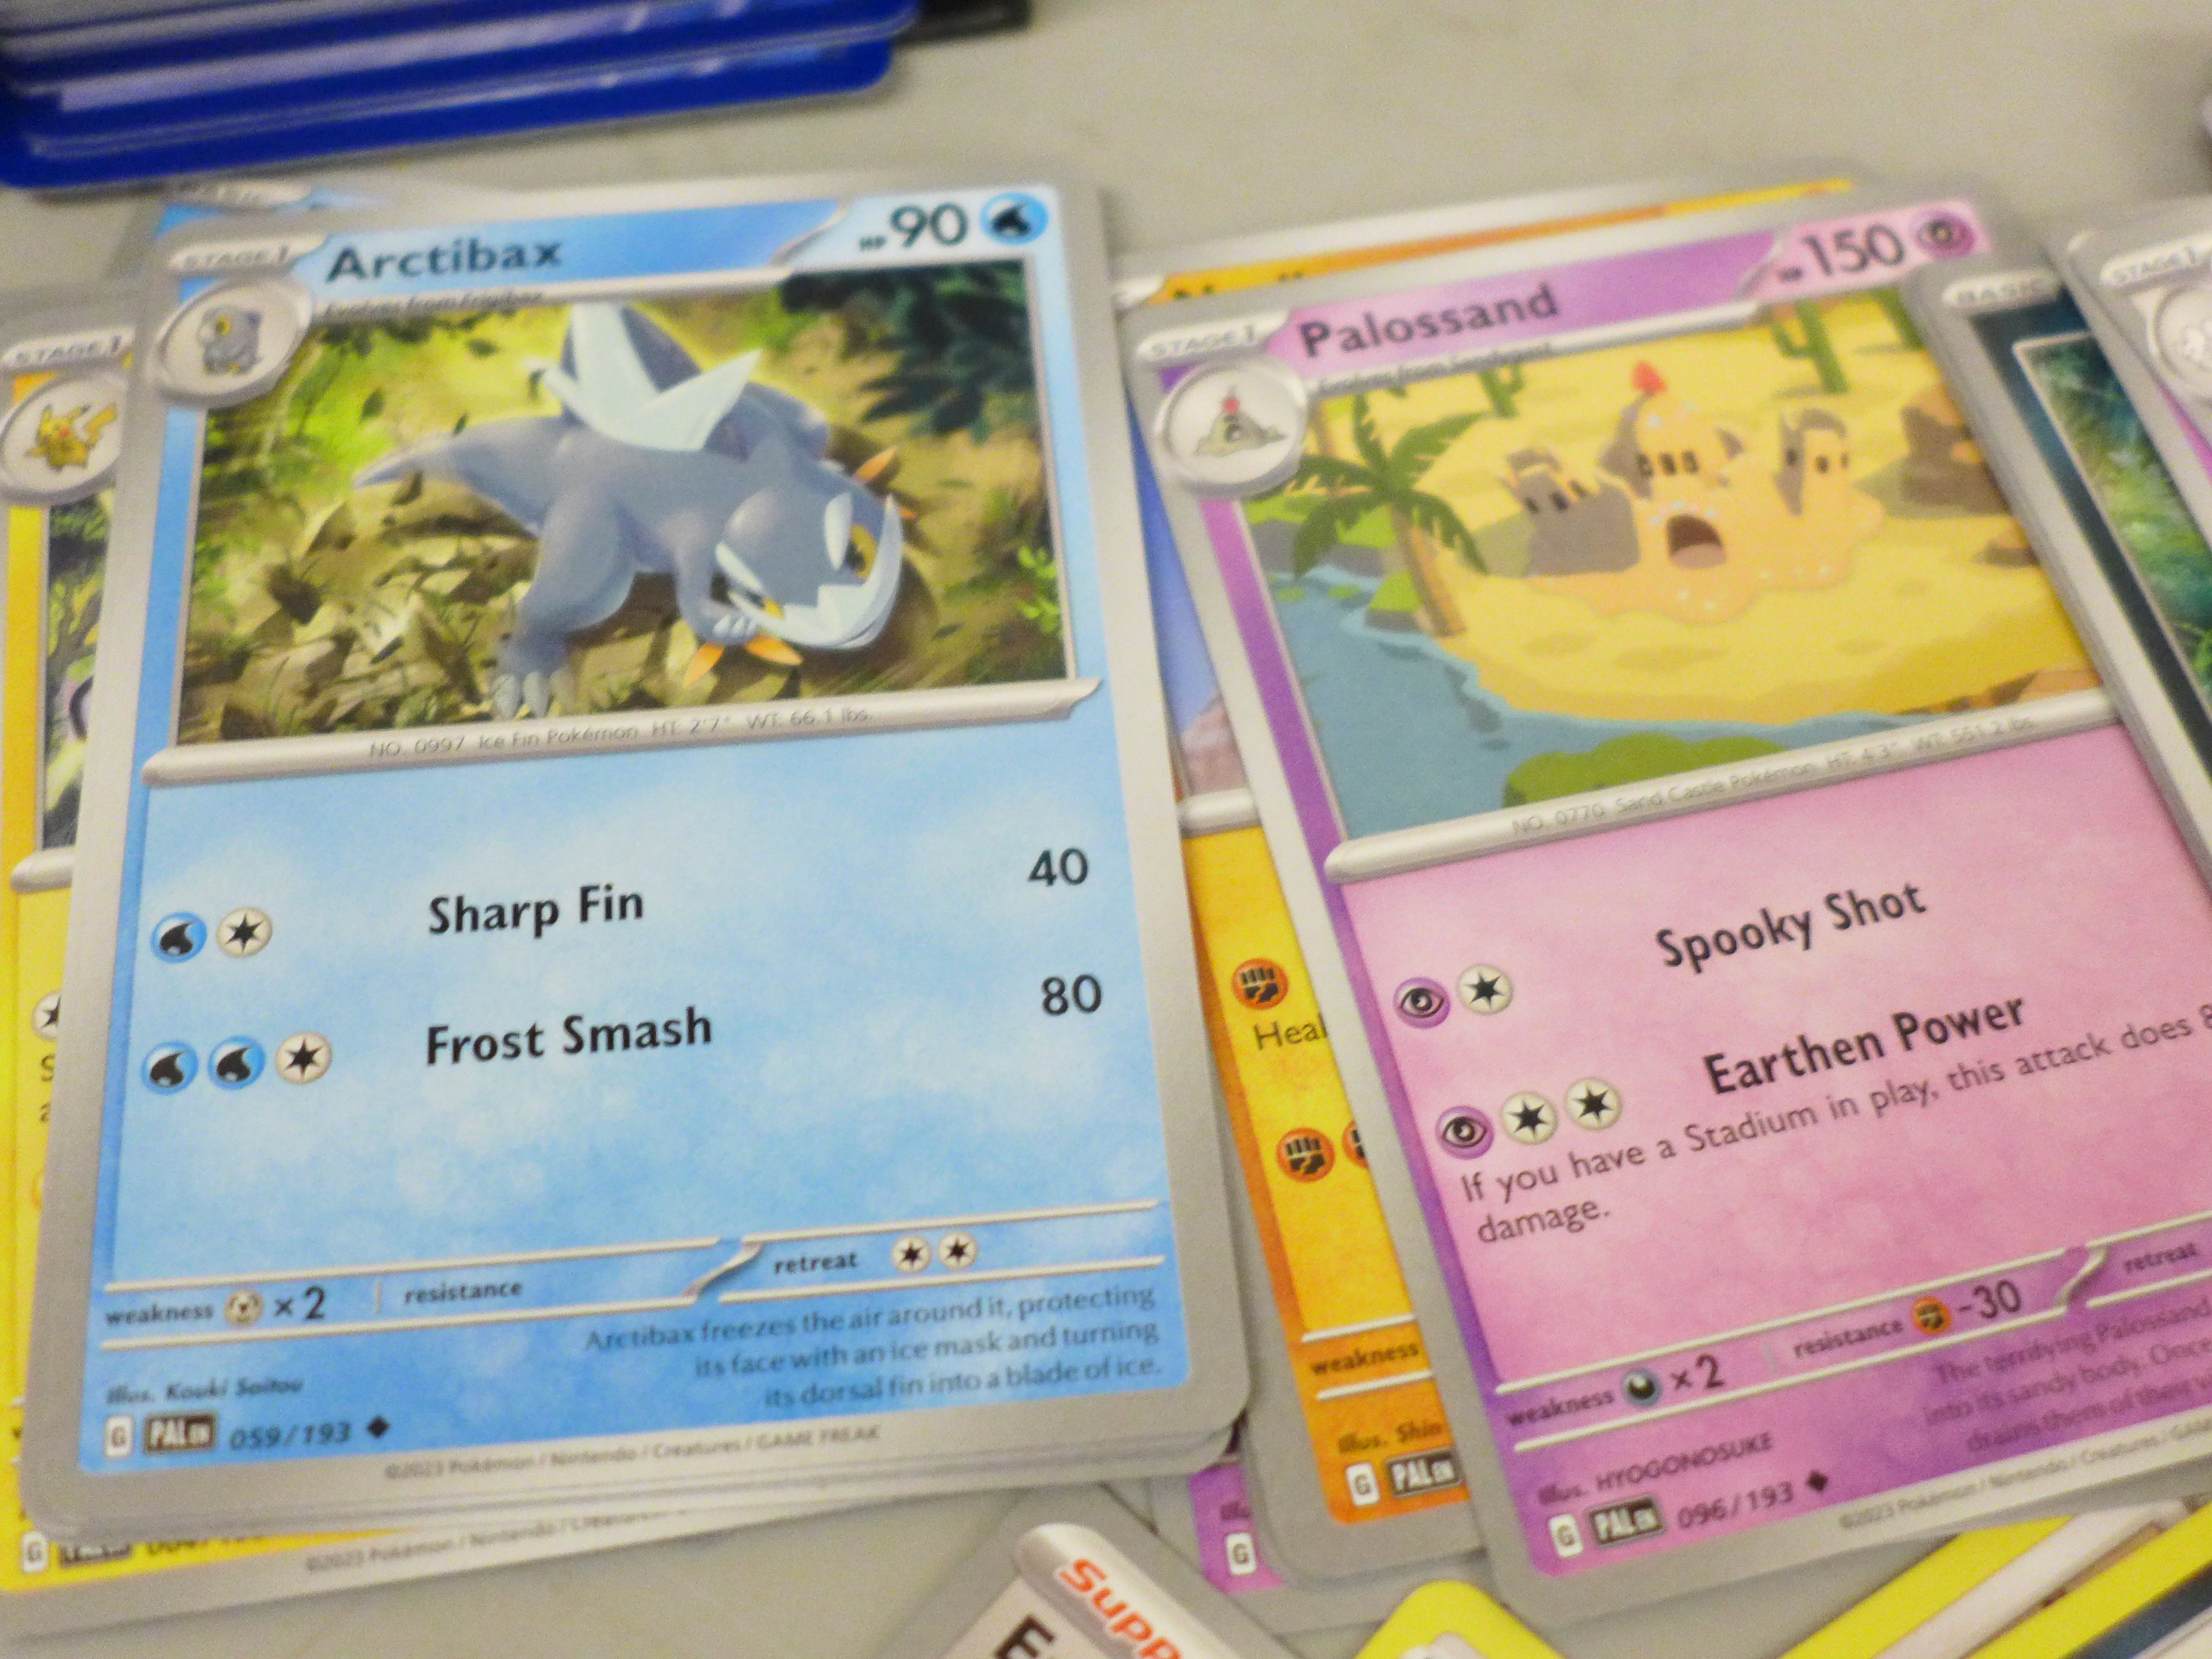 500 x Pokemon cards, including 30 holographic cards, various sets in collectors boxes - Image 3 of 3